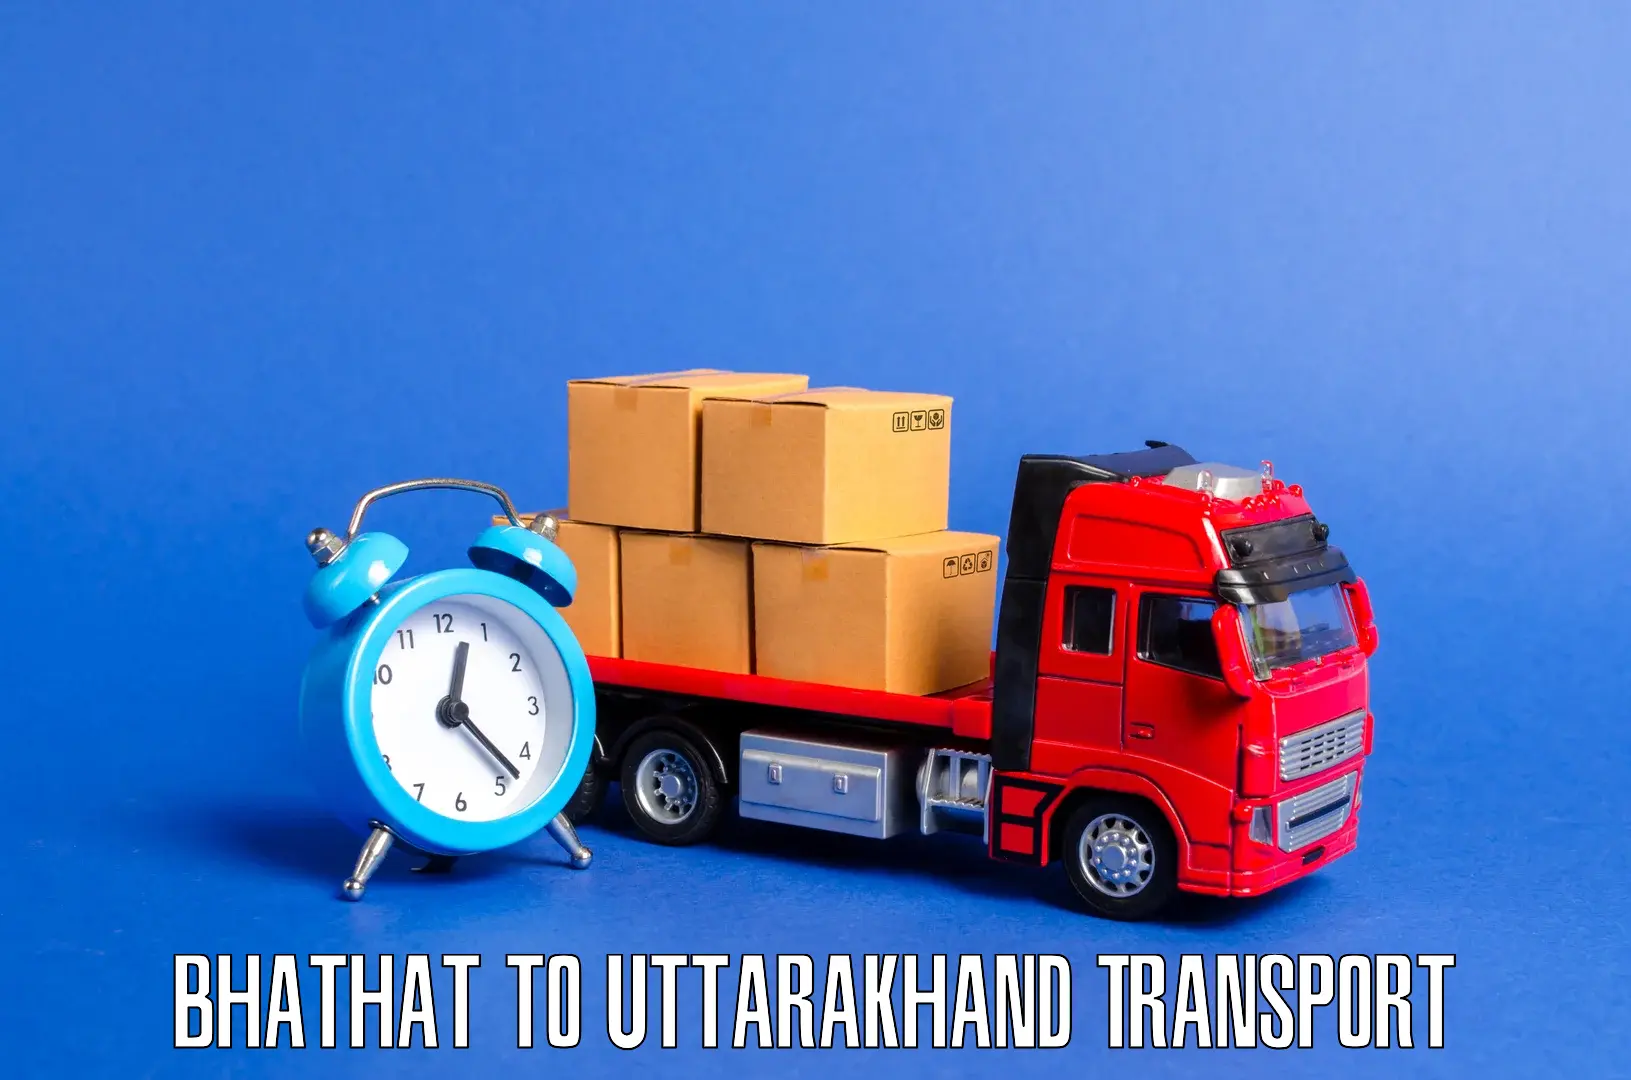 Furniture transport service Bhathat to Lohaghat